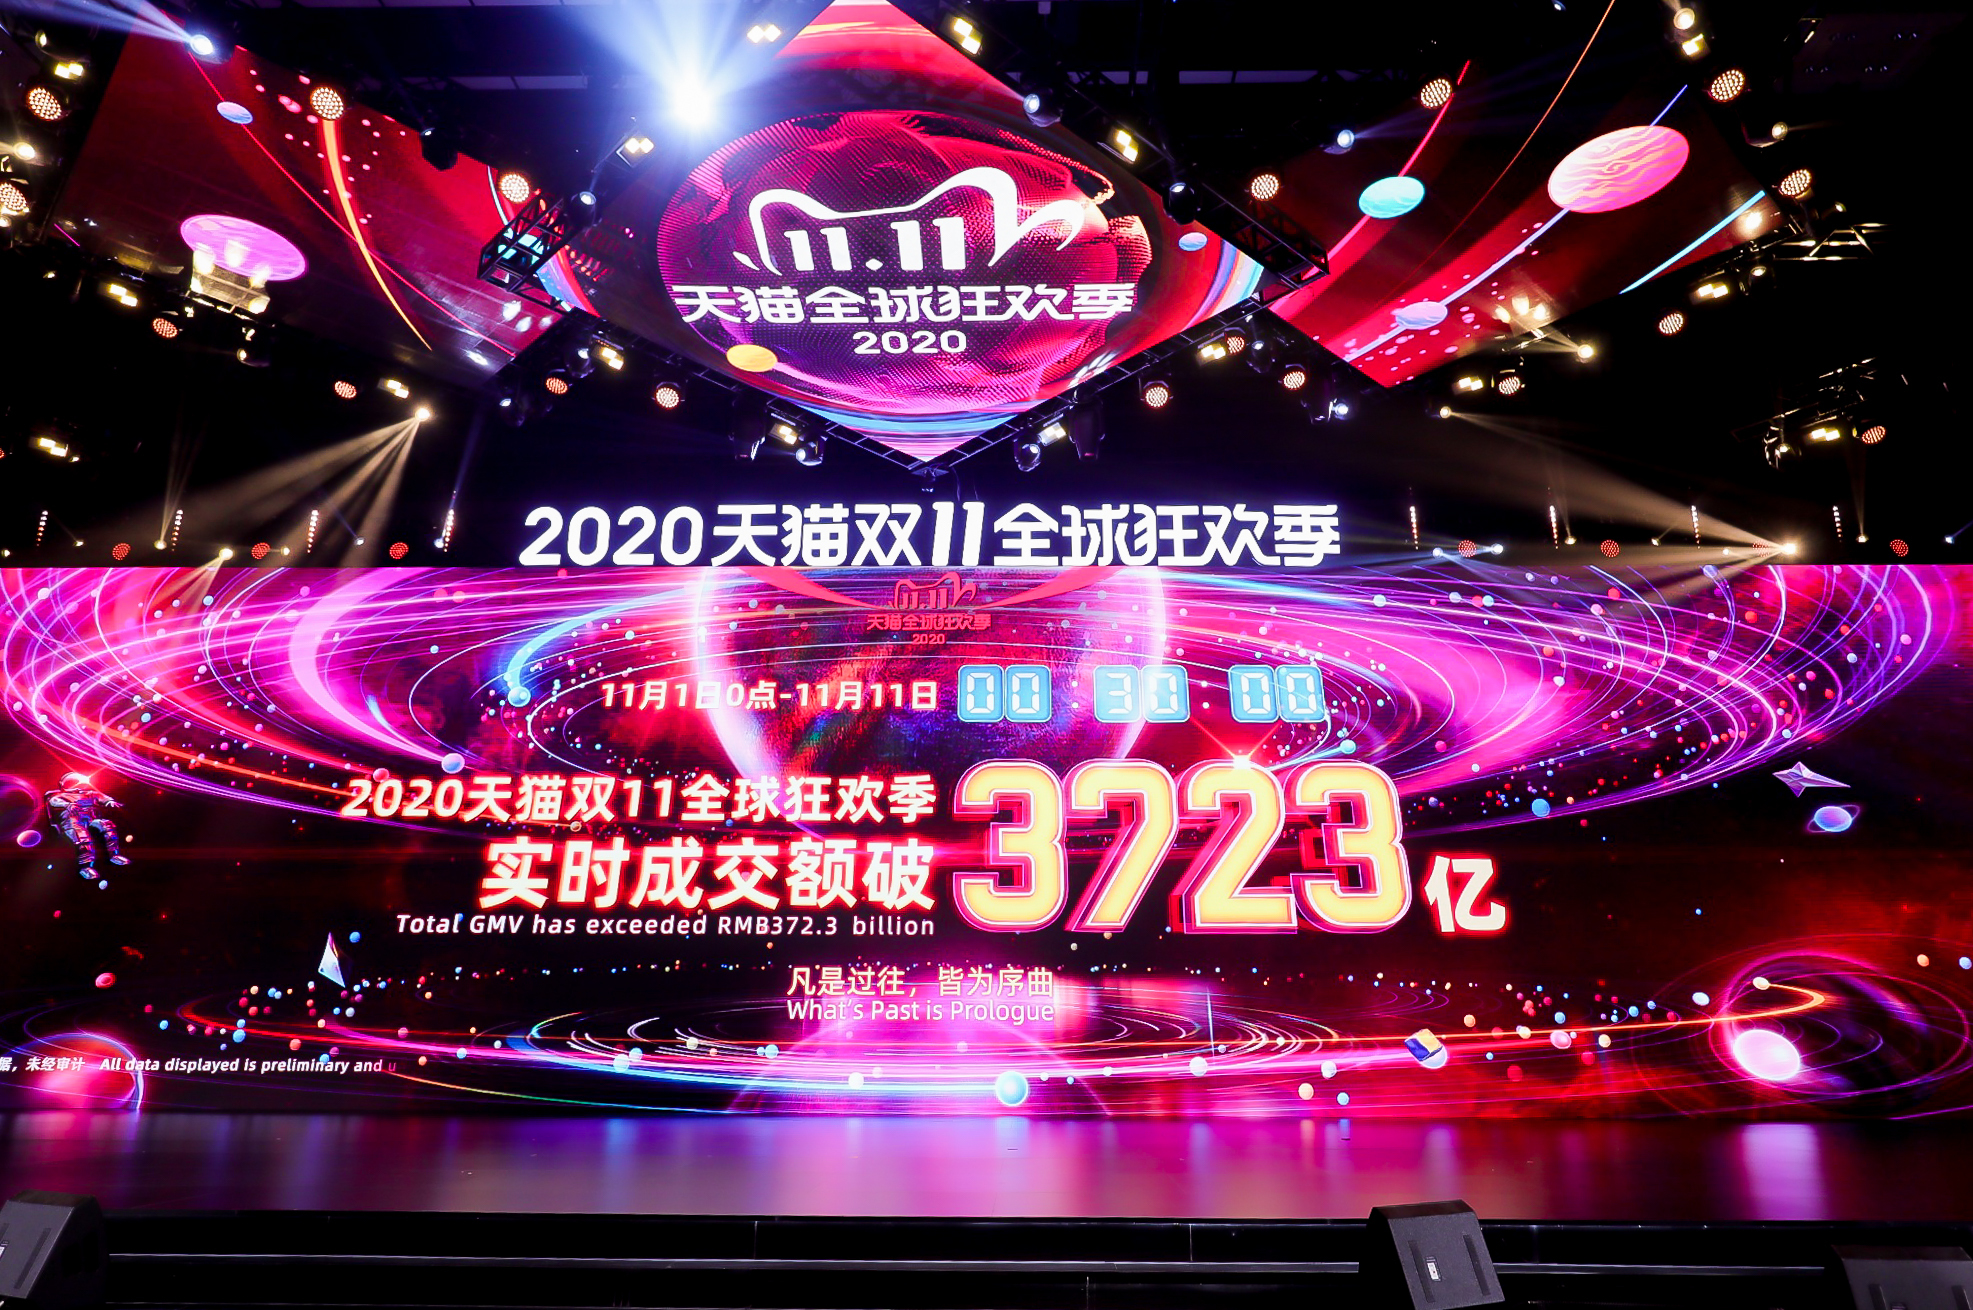 Alibaba sales growth slows in first 10 days of shopping festival